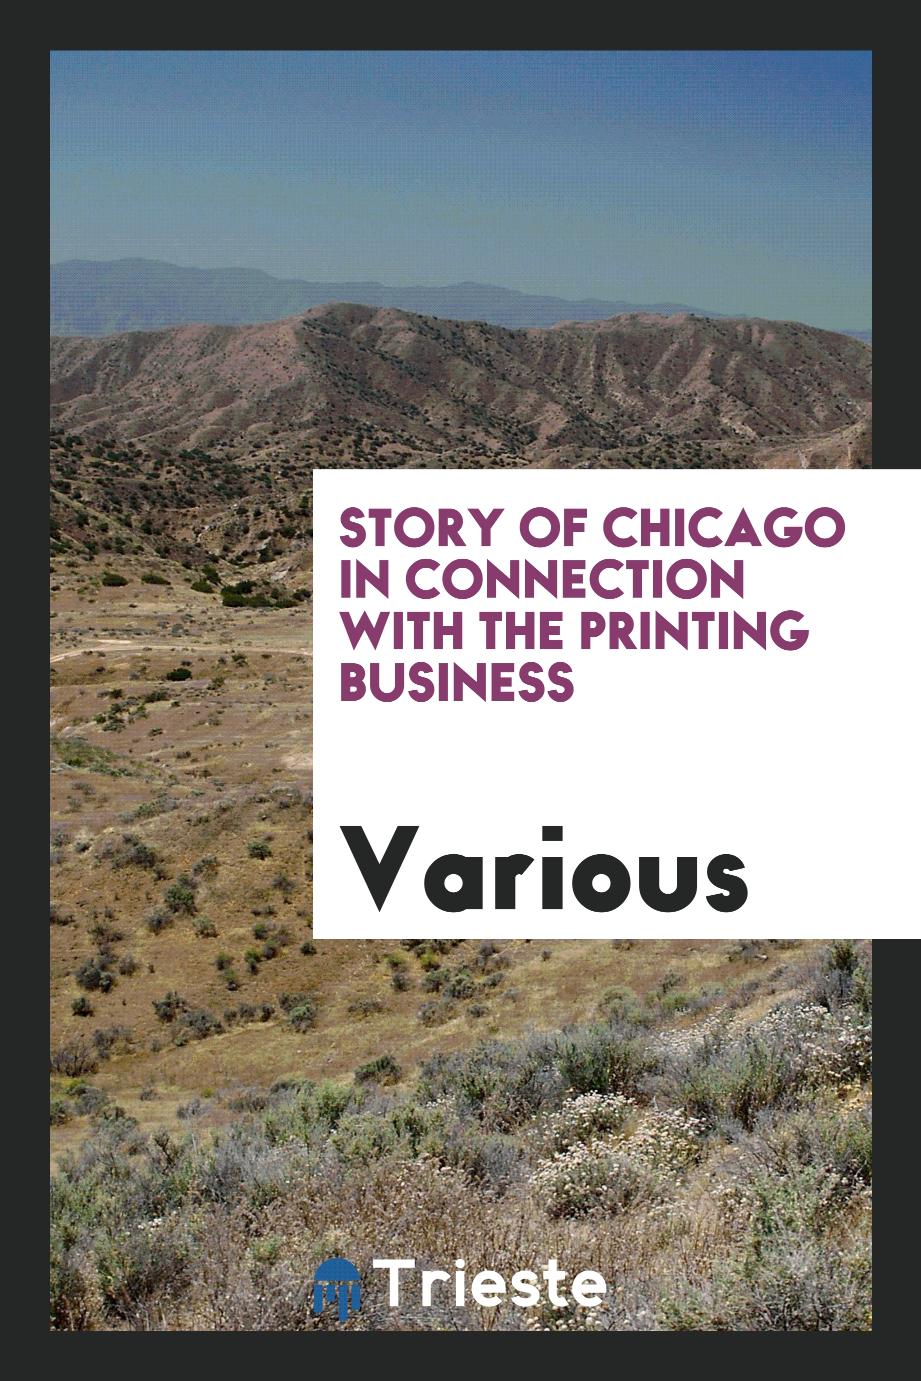 Story of Chicago in connection with the printing business